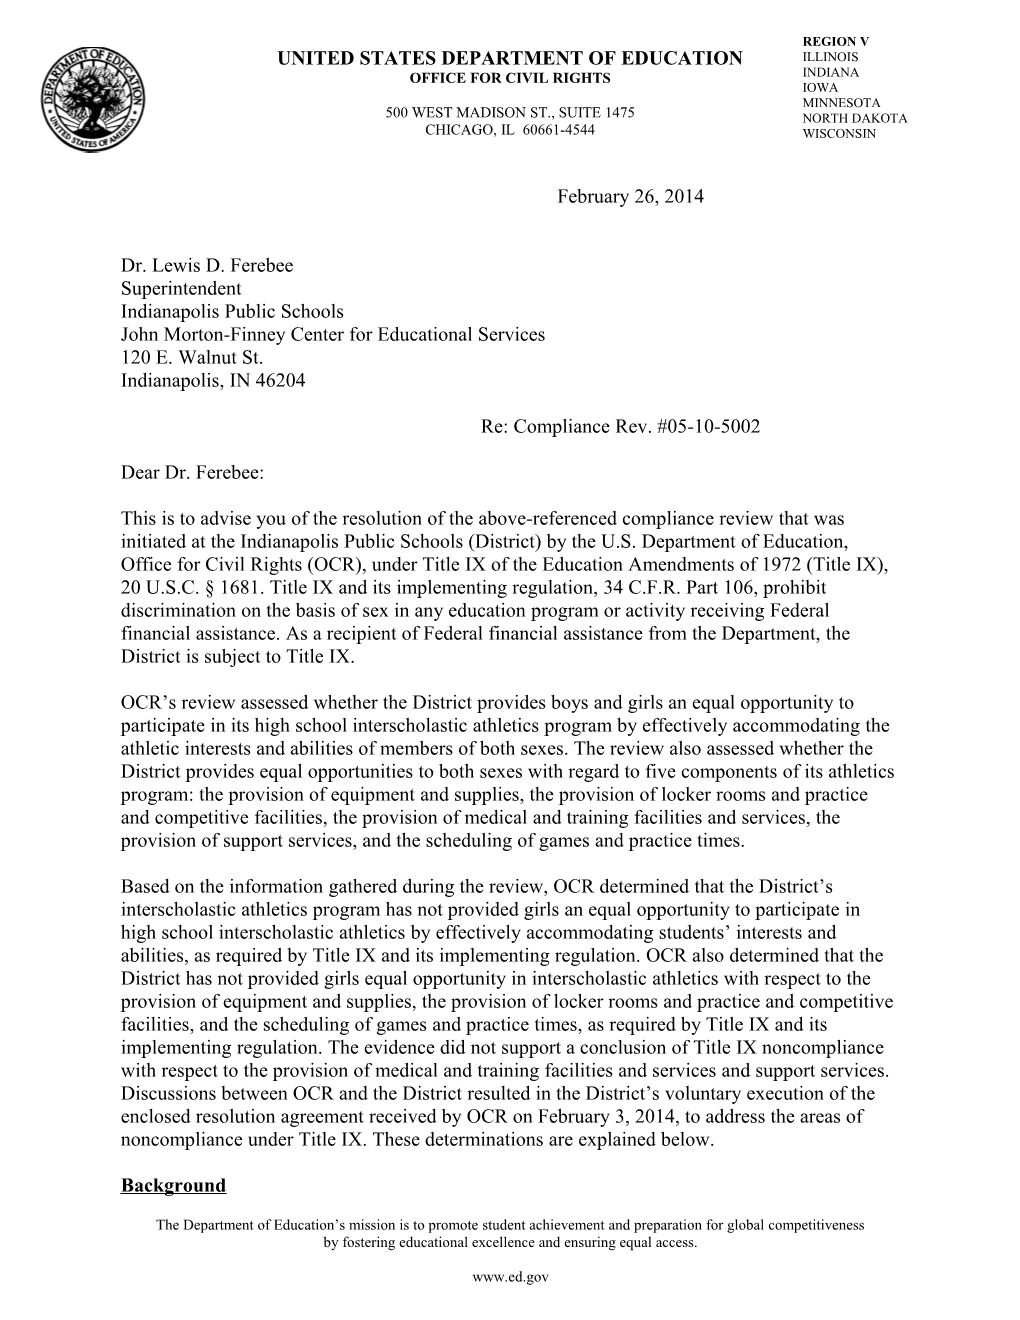 Resolution Letter: Indianapolis Public Schools, Indiana: Compliance Review #05-10-5002